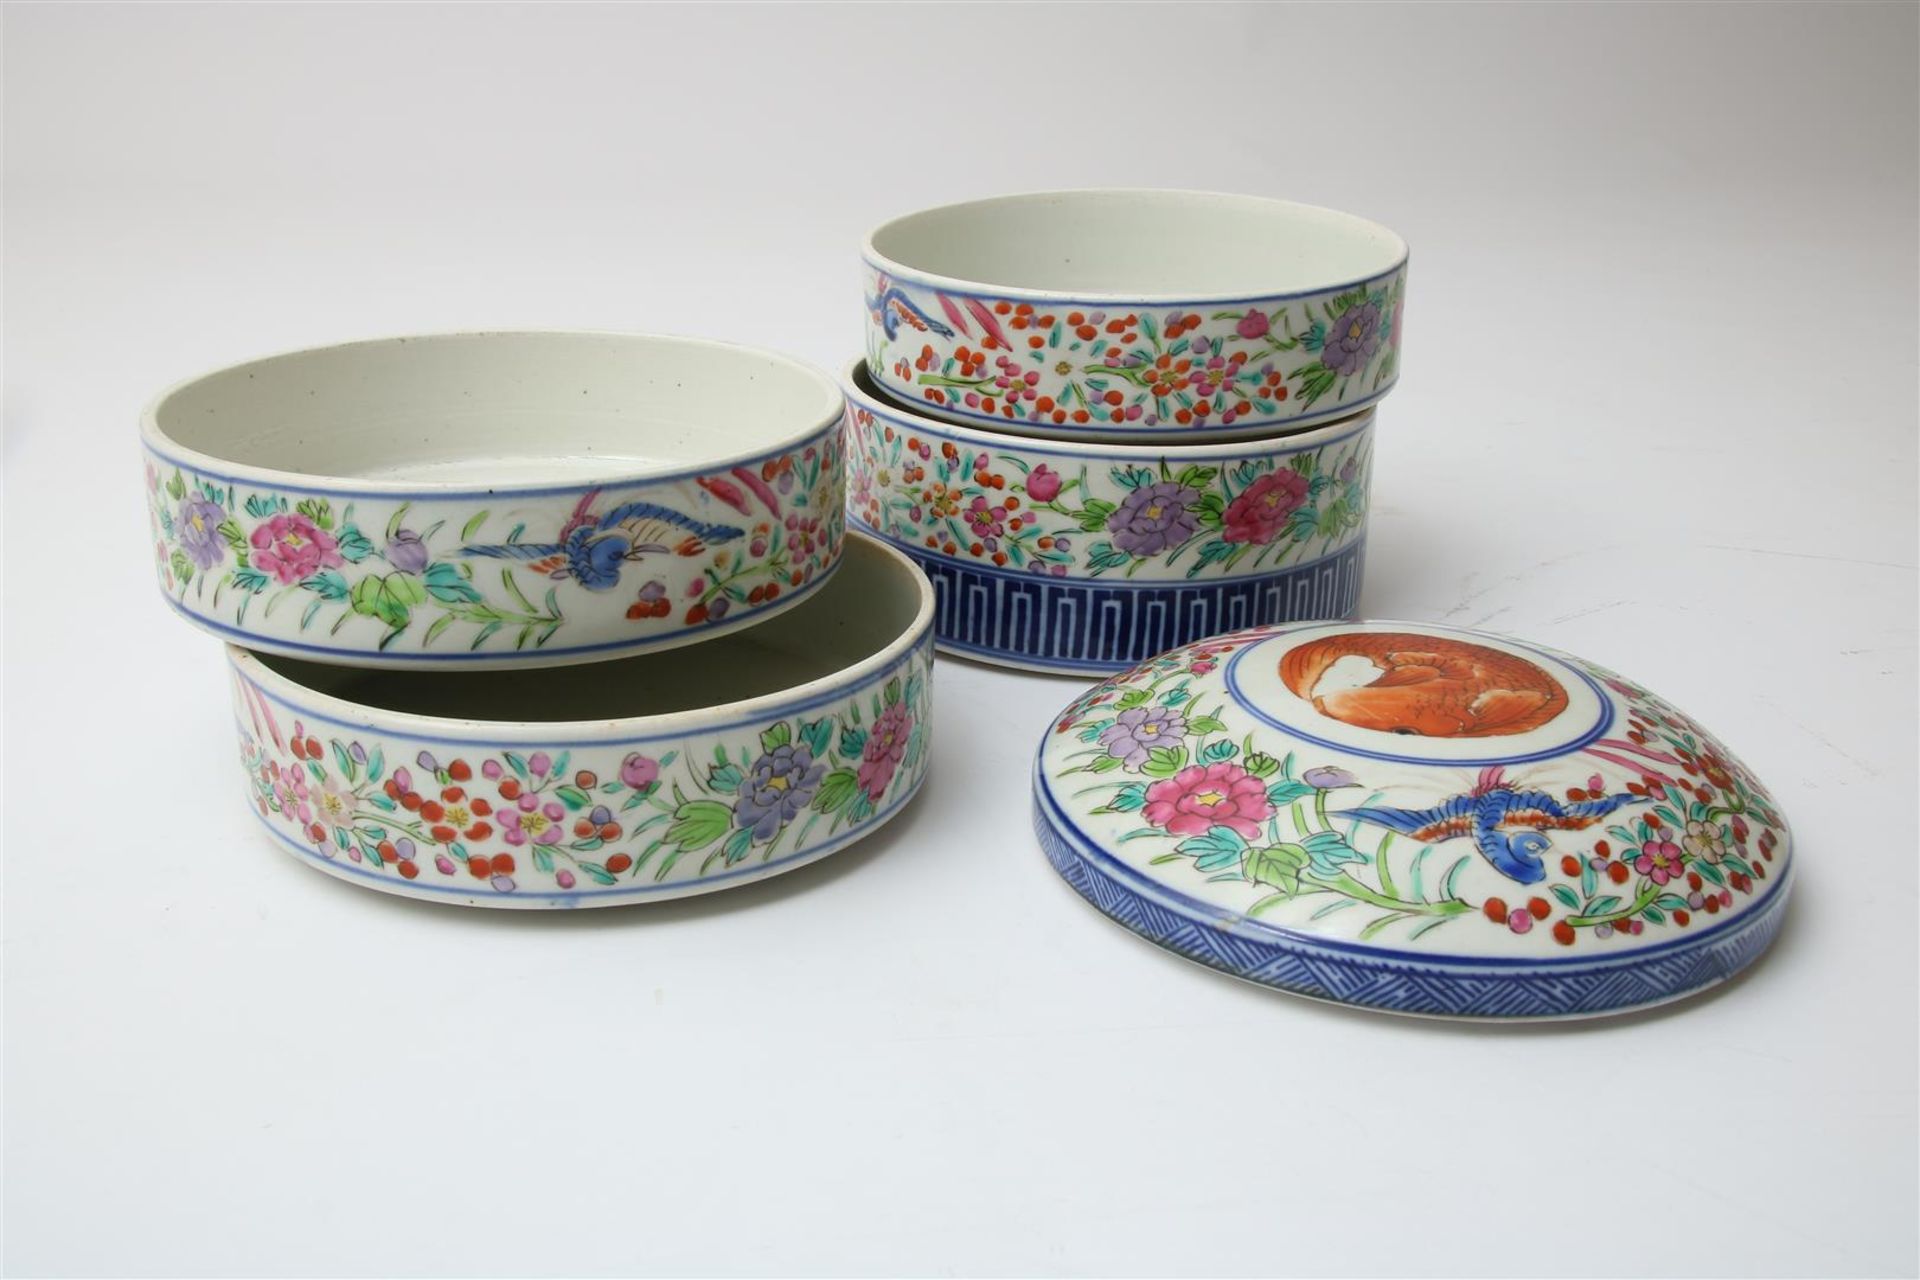 Polychrome porcelain tingkat painted with flowers and phoenixes, consisting of 4 layers, on the - Image 2 of 5